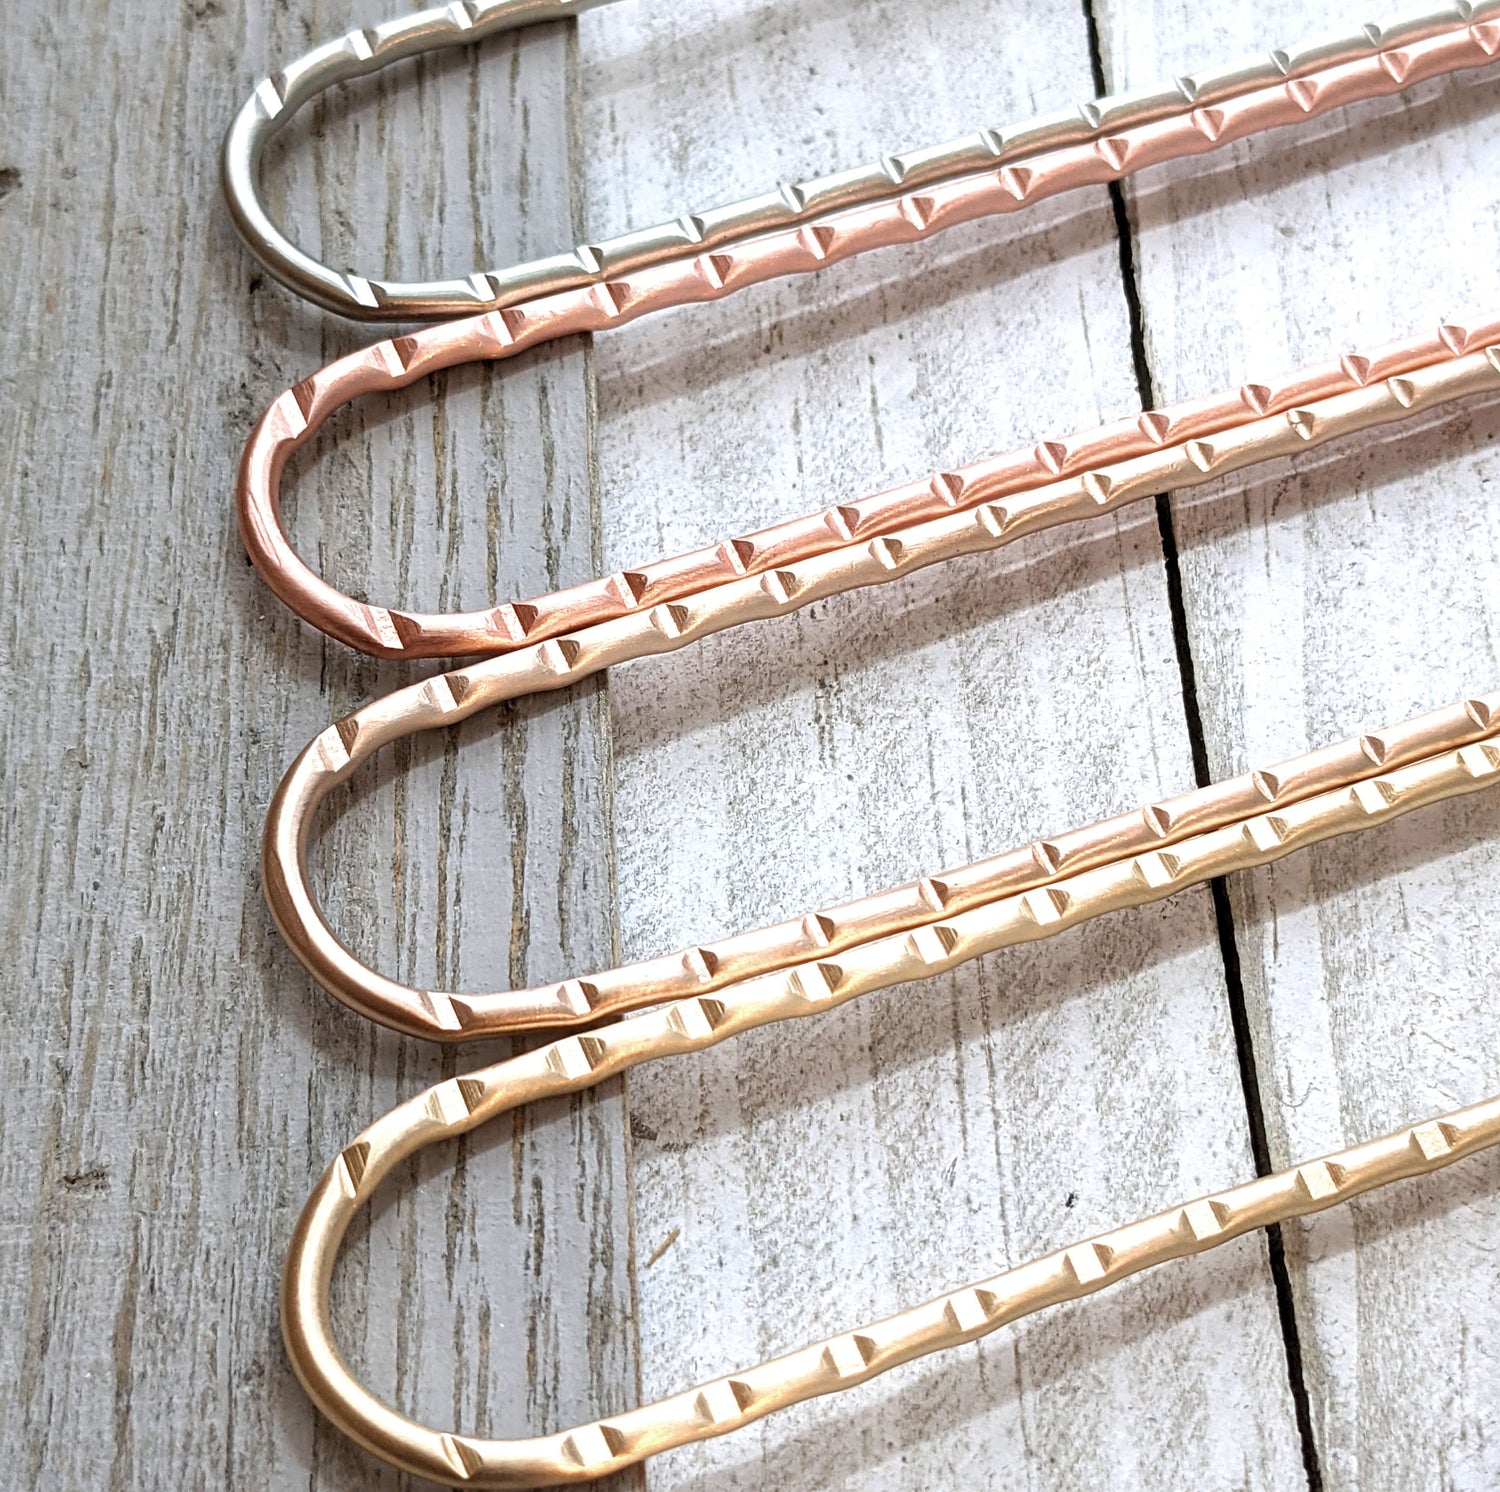 Metal hair forks shown in the four options - nickel, copper, bronze, and brass. This picture shows the detailed deep line grooves in the top portion of each hair stick.